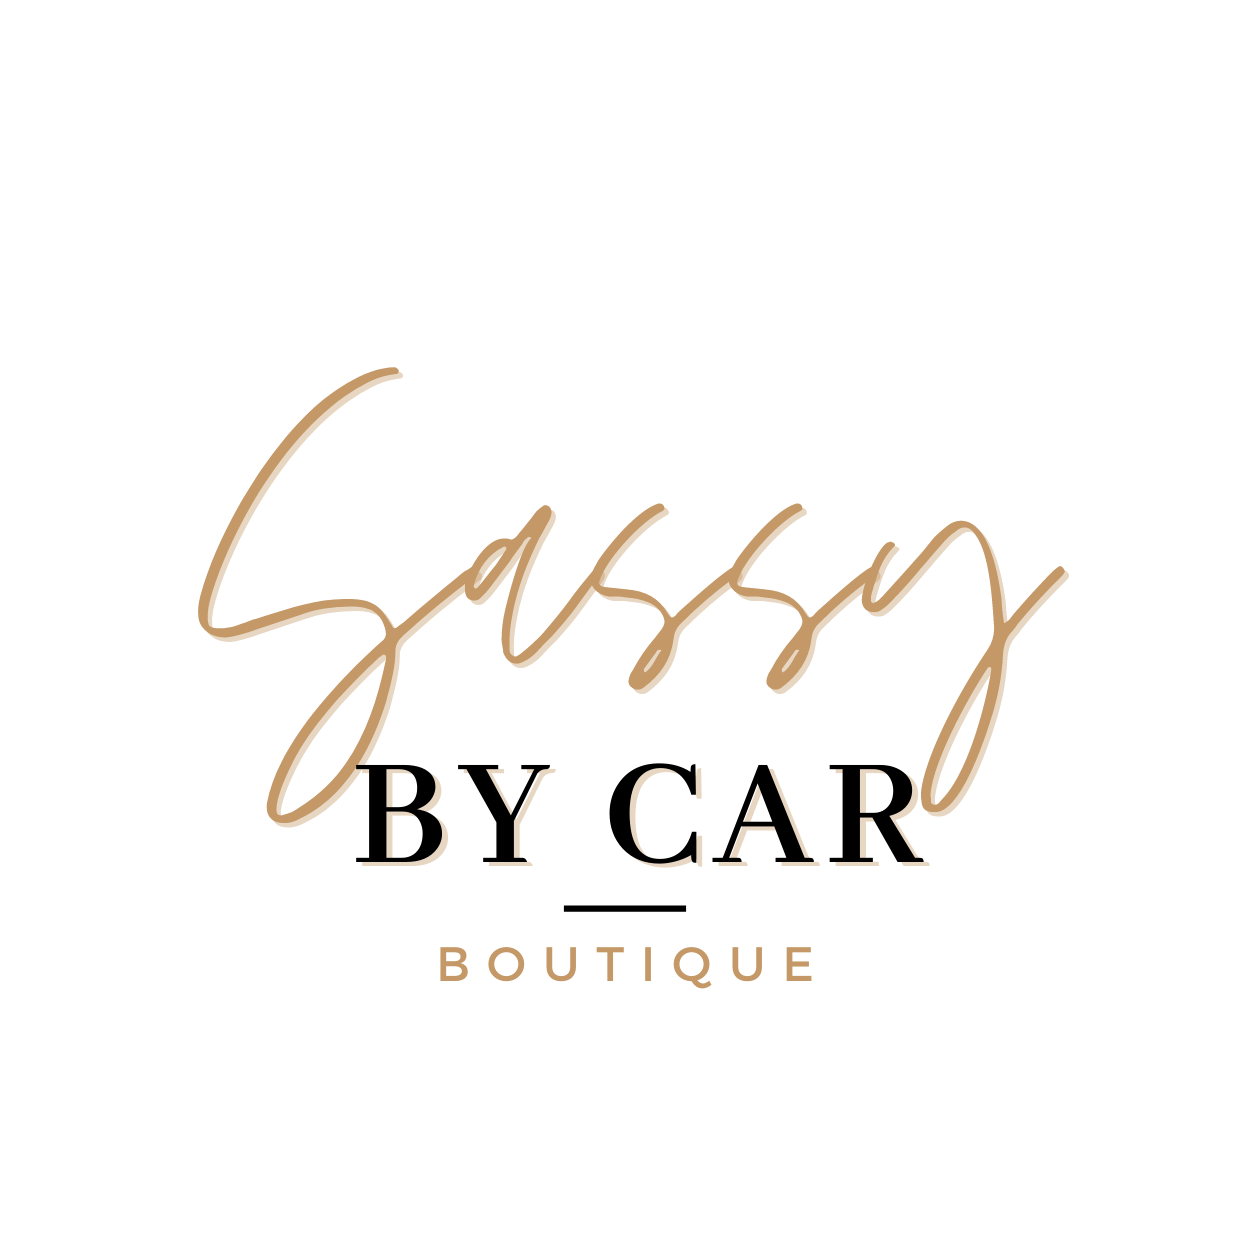 Sassy by Car Boutique